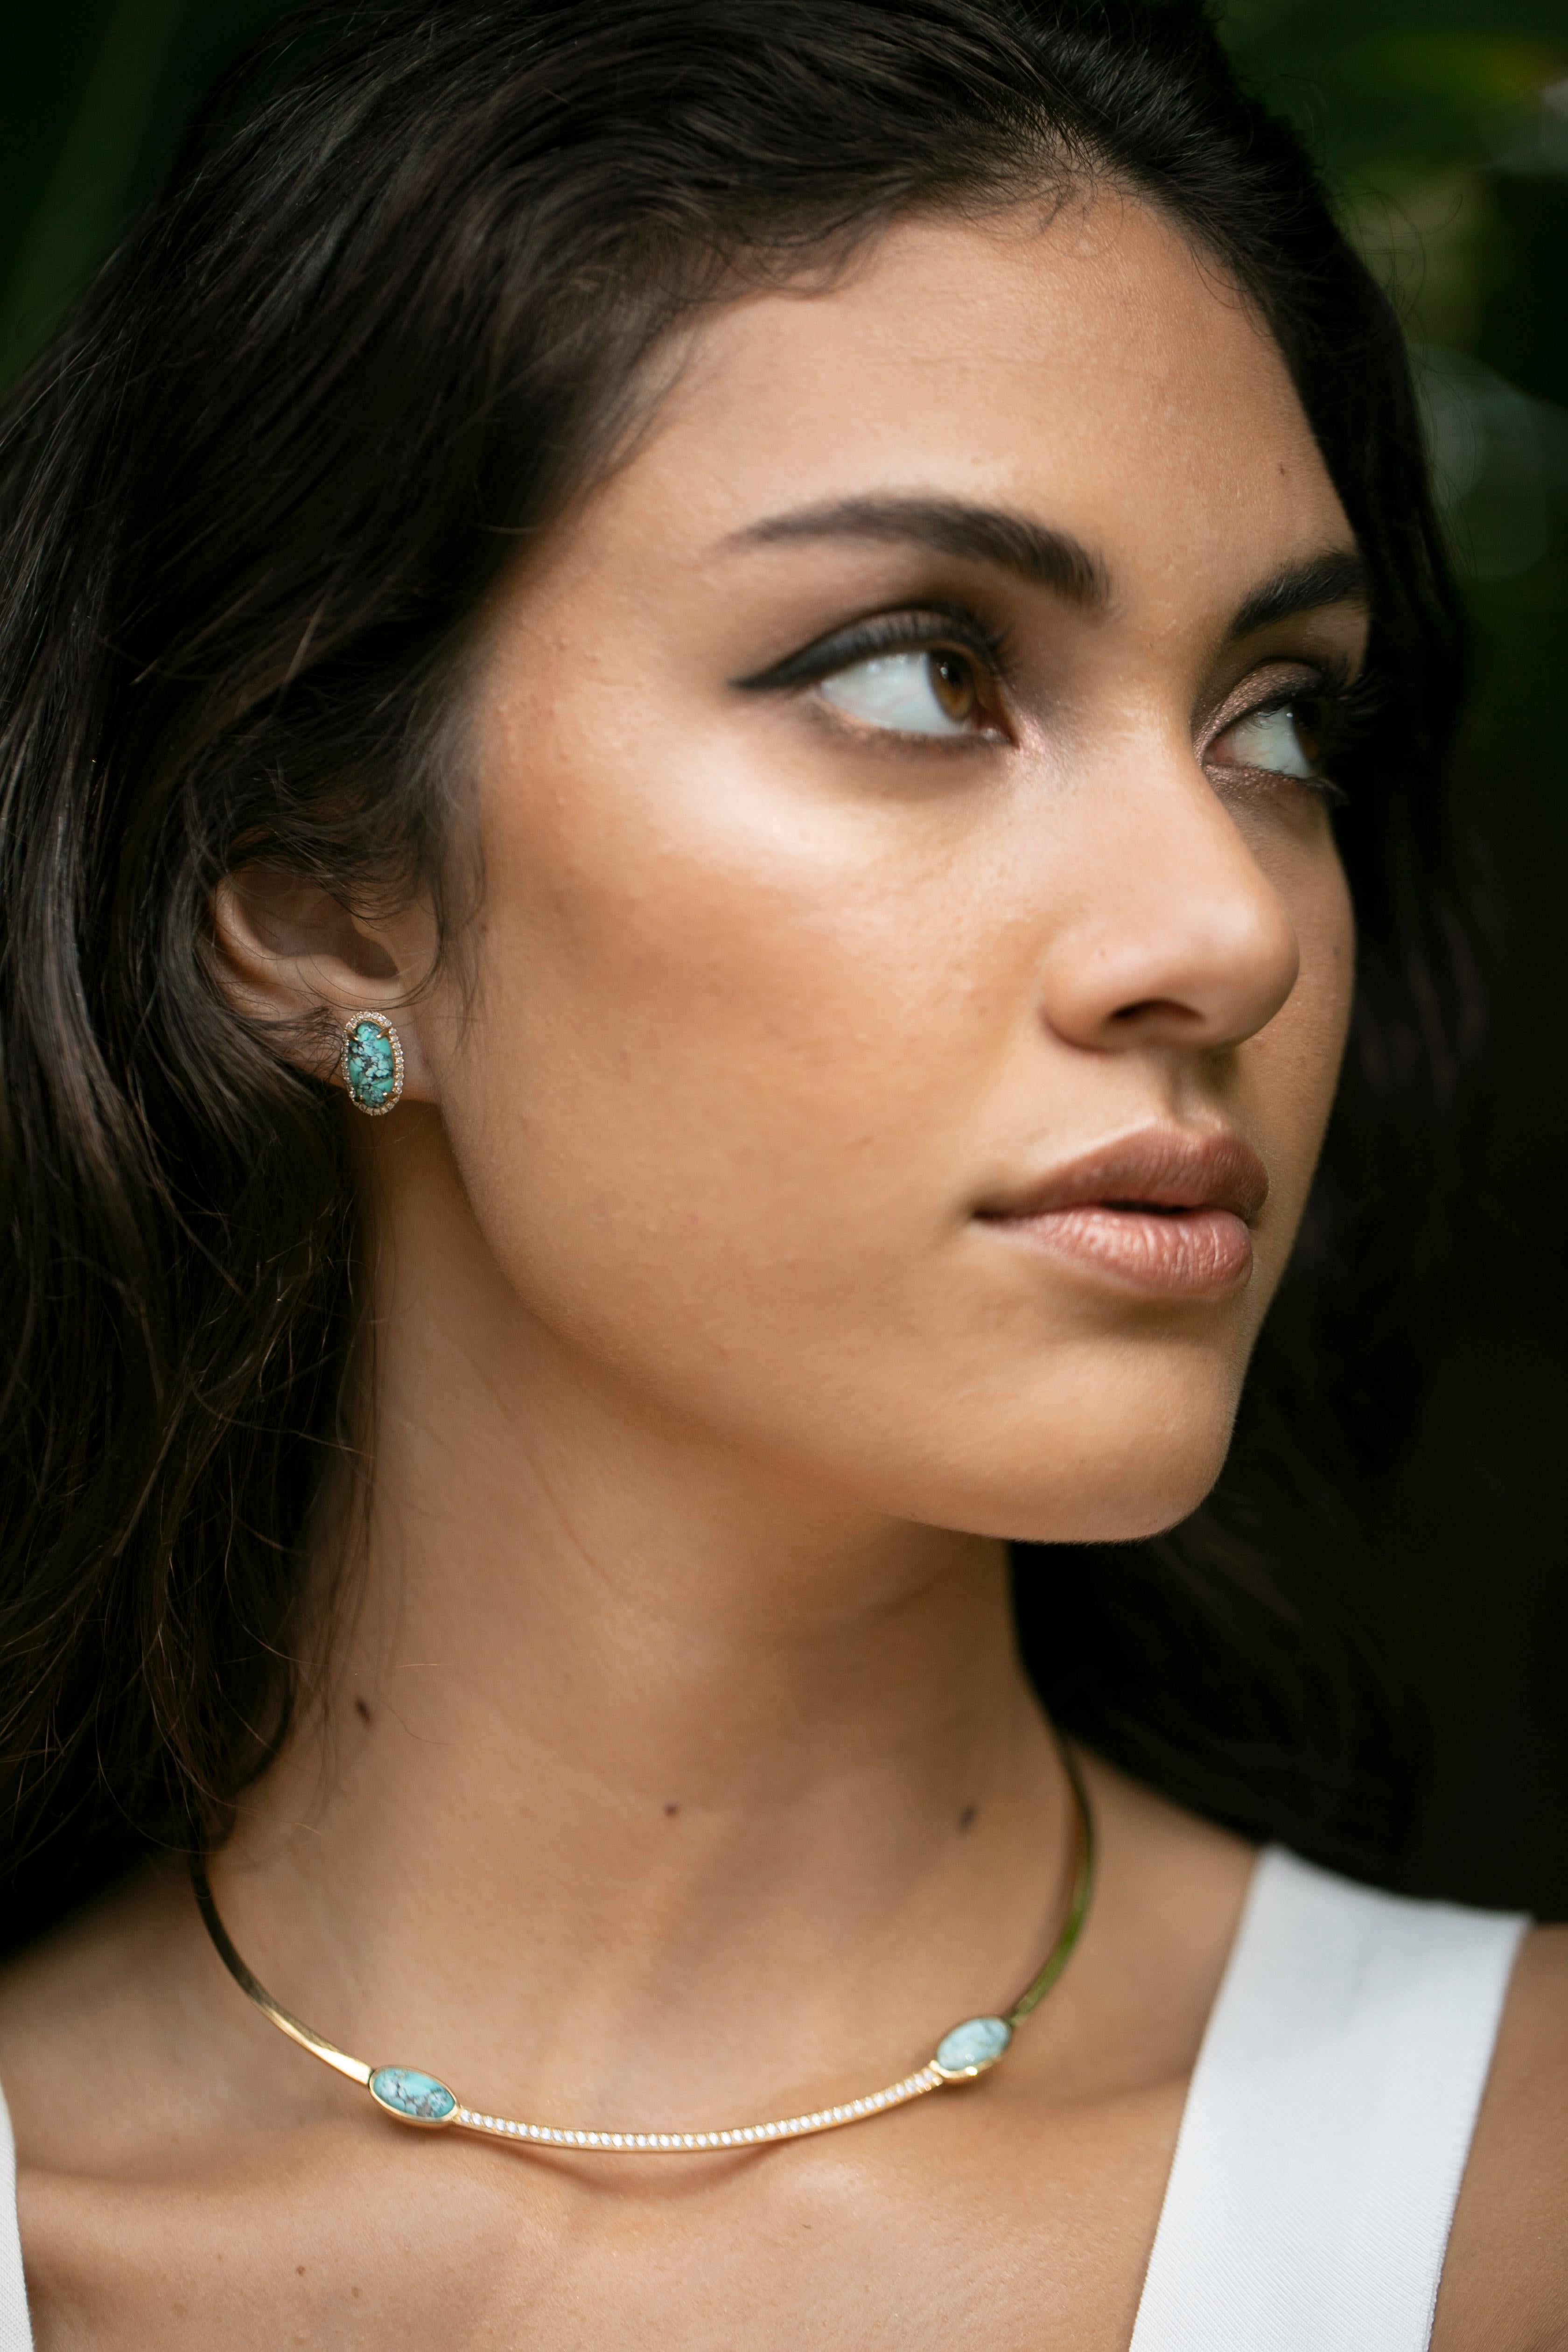 Cabochon natural turquoise studs with a halo of white diamonds with a total carat weight of 0.25cts set in 18k gold.
Made to order in your choice of 18k gold item takes 5-6 weeks to ship. 
Please note turquoise may differ from photos.